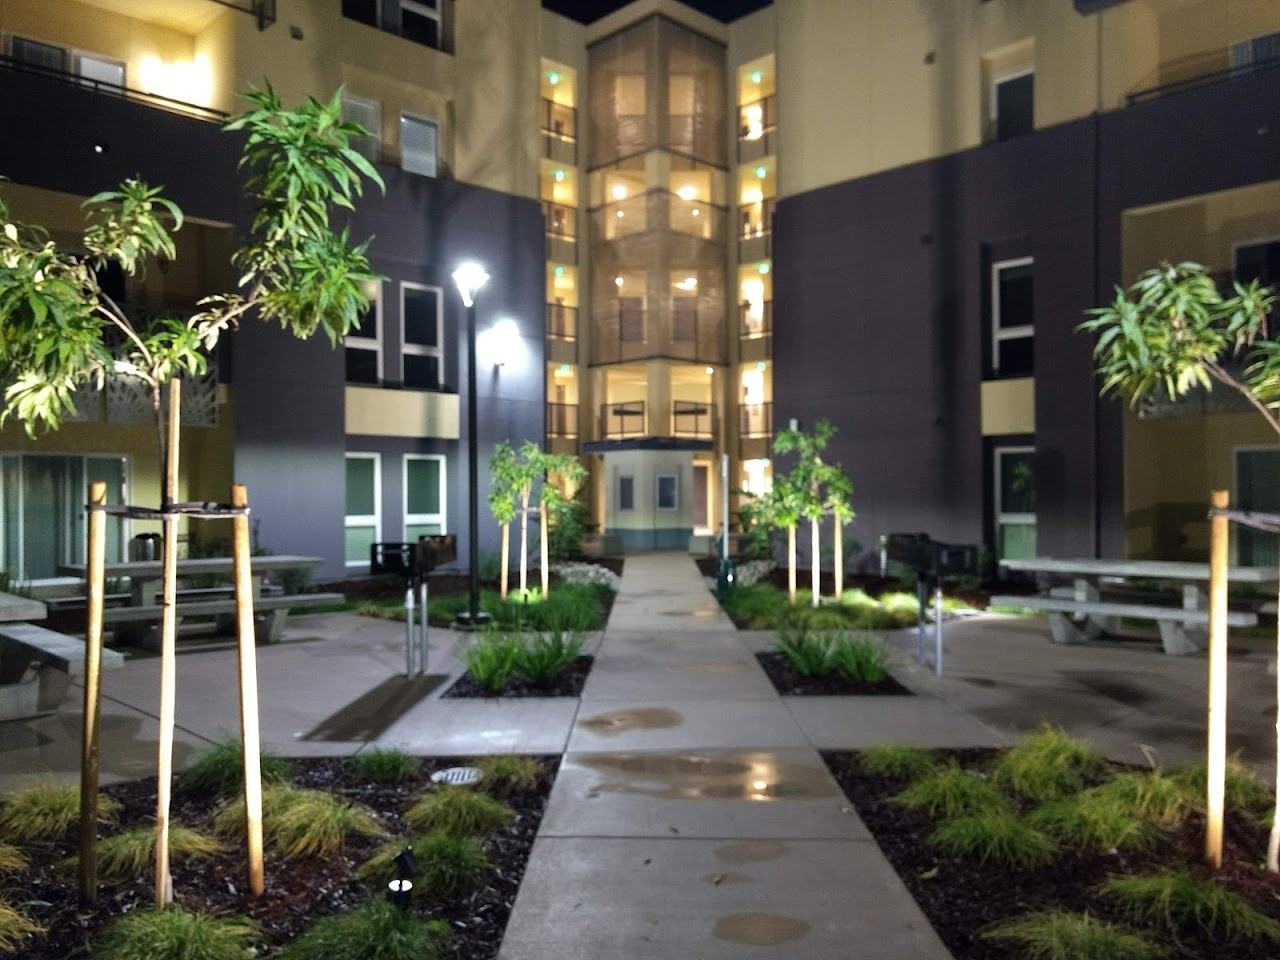 Photo of ALEXANDER STATION. Affordable housing located at 200 E 10TH STREET GILROY, CA 95020